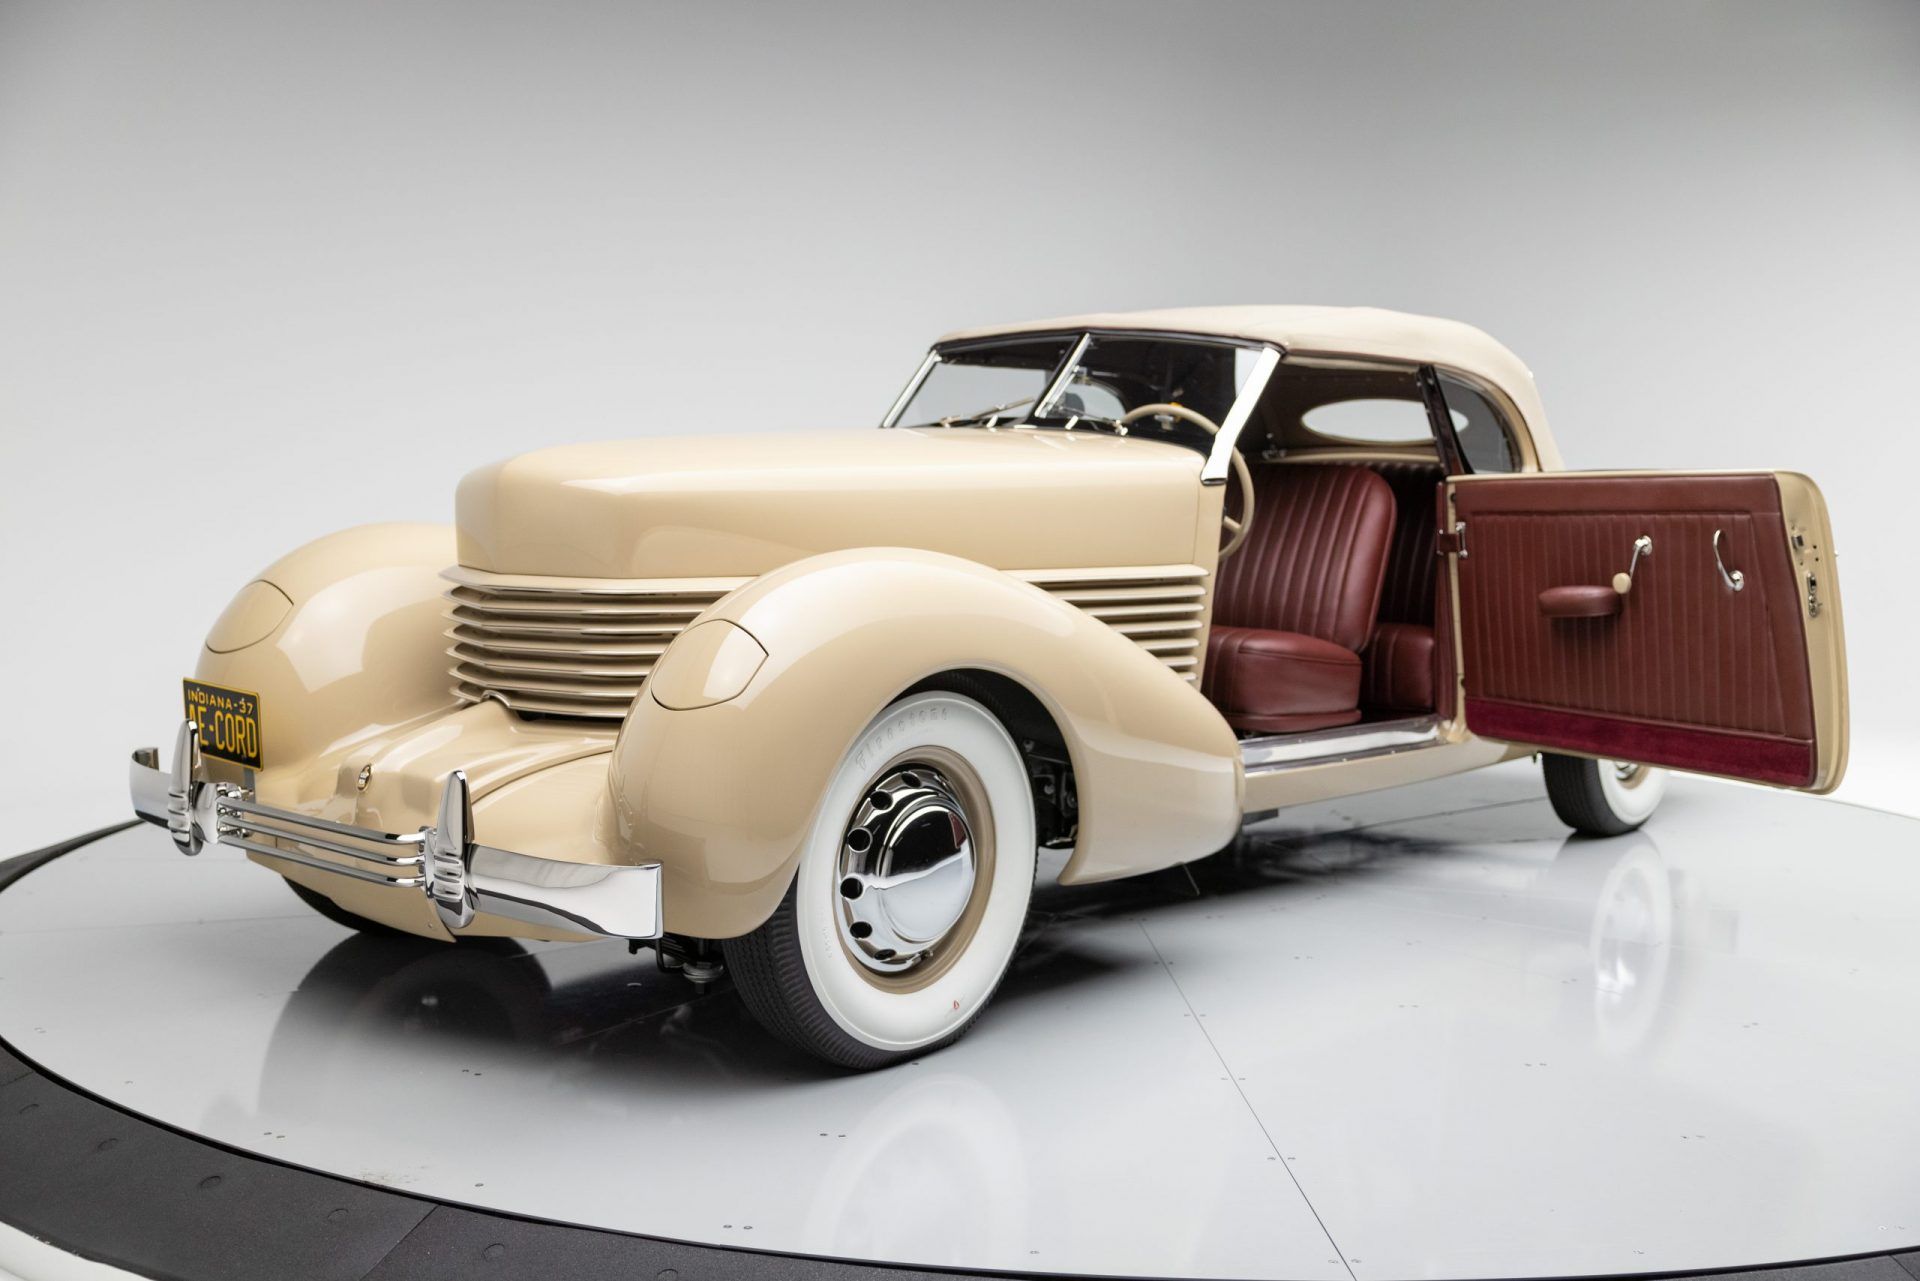 Amelia Earhart's 1937 Cord added to National Historic Vehicle Register